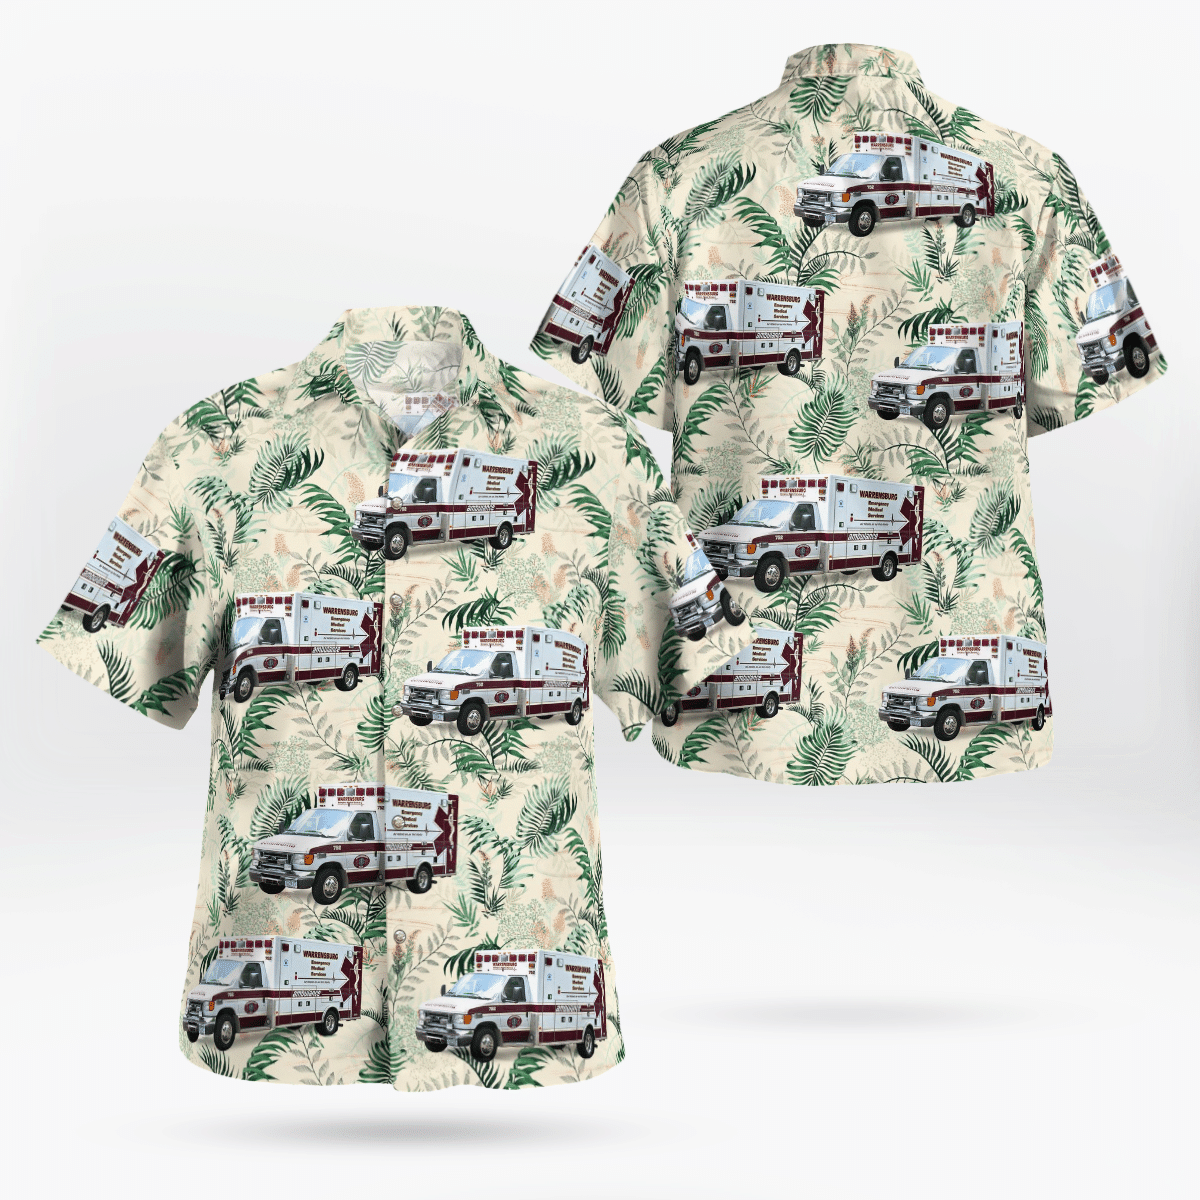 If you are in need of a new summertime look, pick up this Hawaiian shirt 47